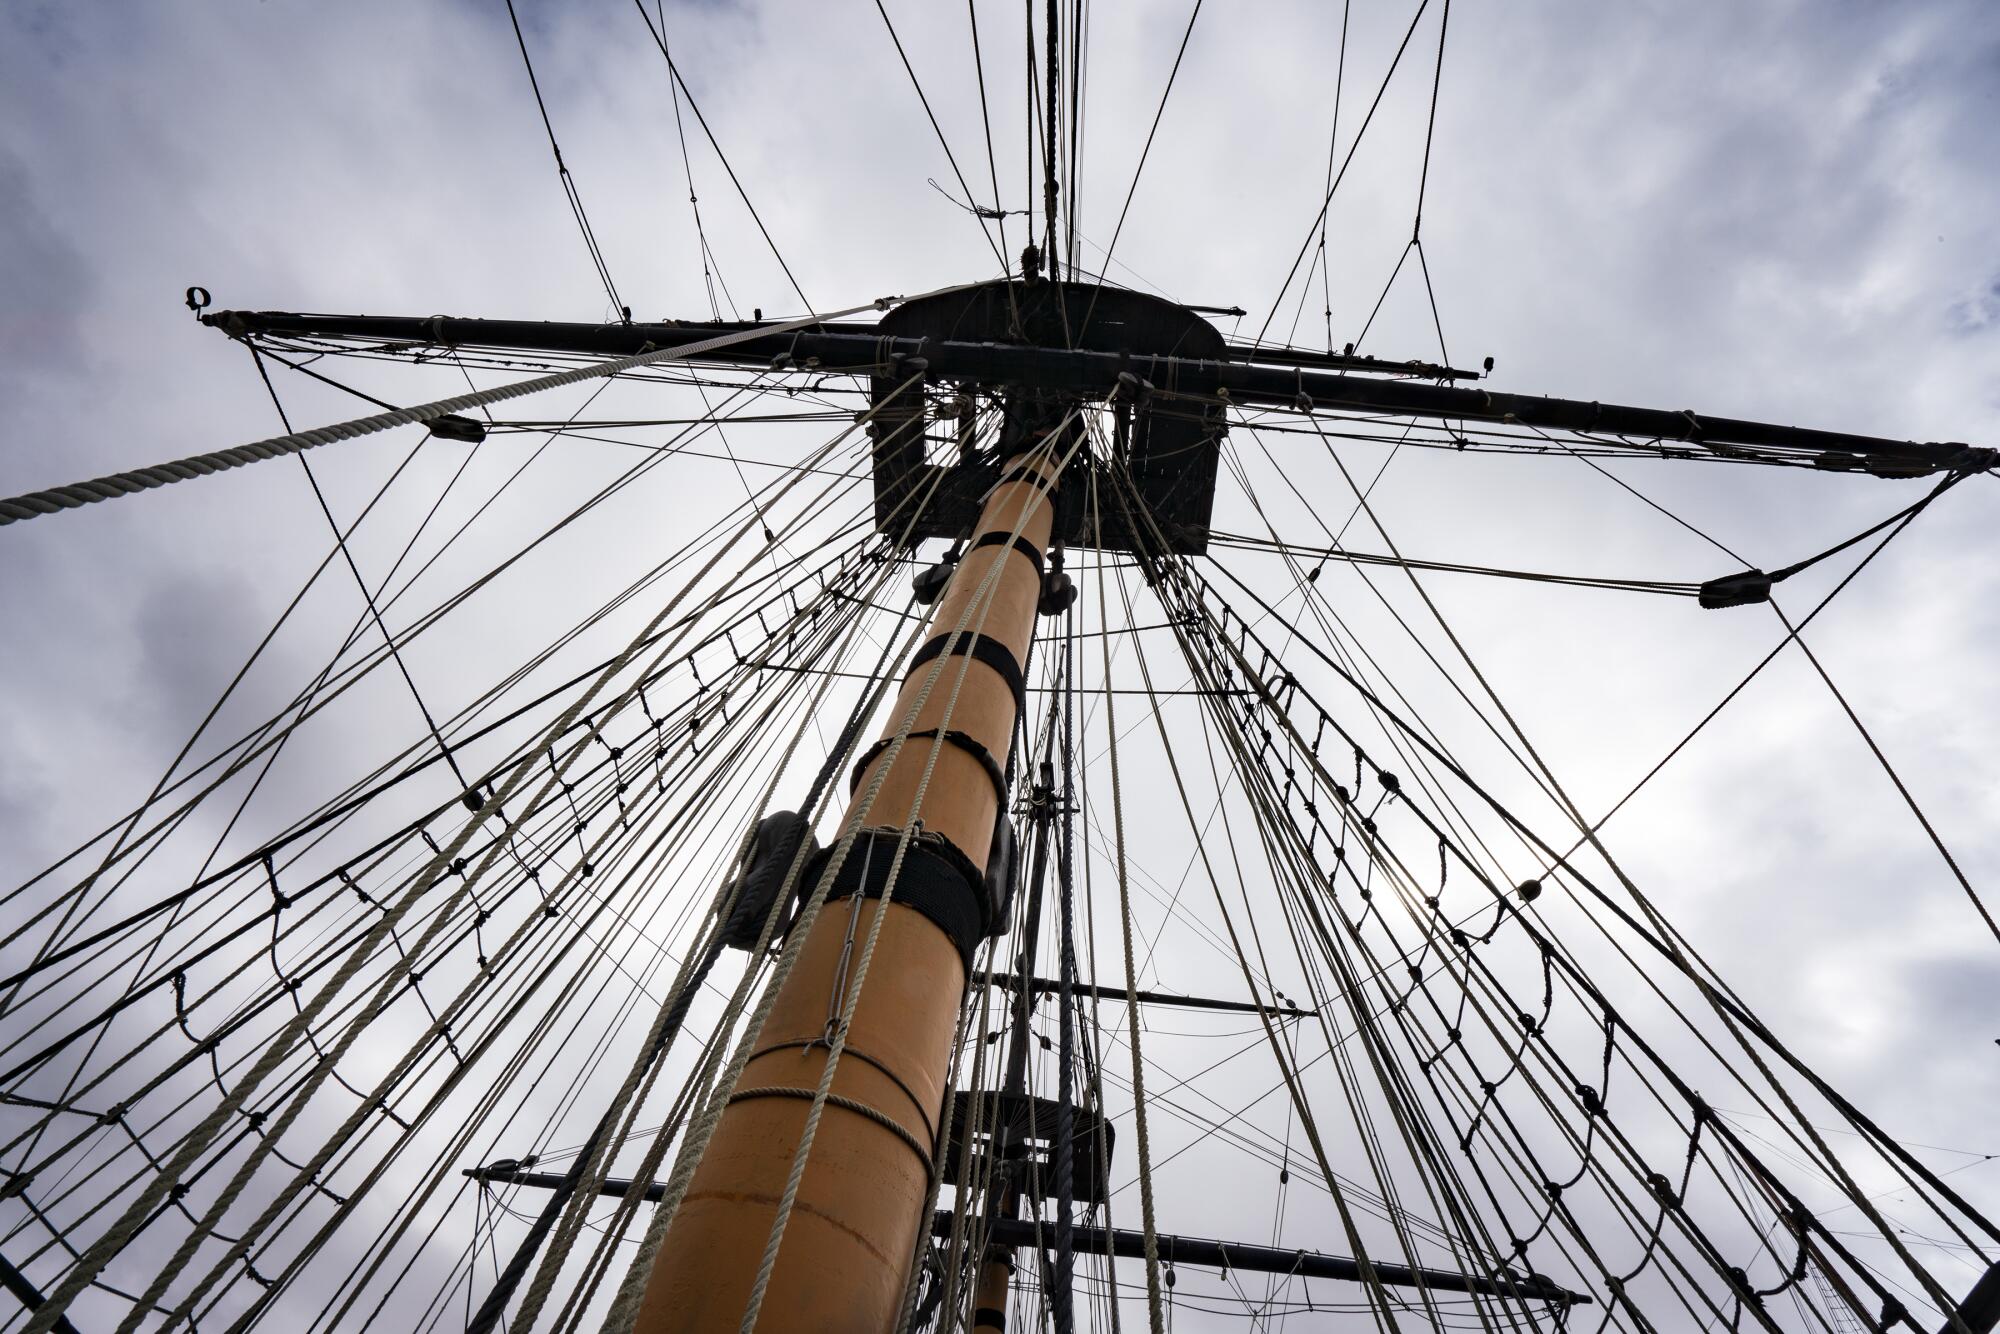 A view of the ship's mast.